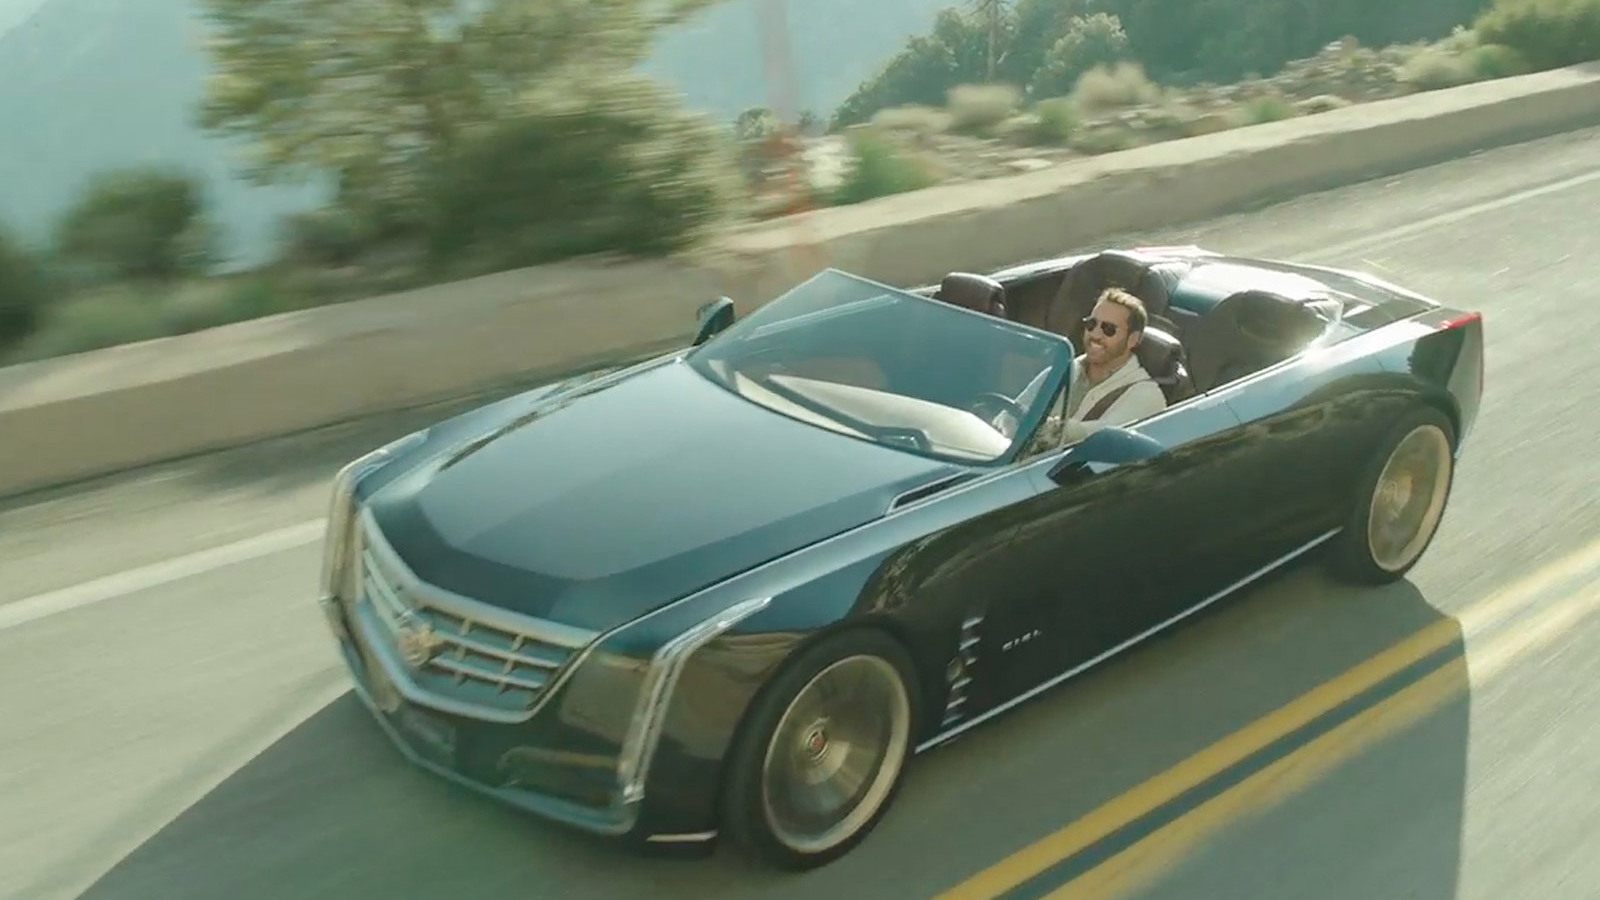 Jeremy Piven in the Cadillac Ciel concept